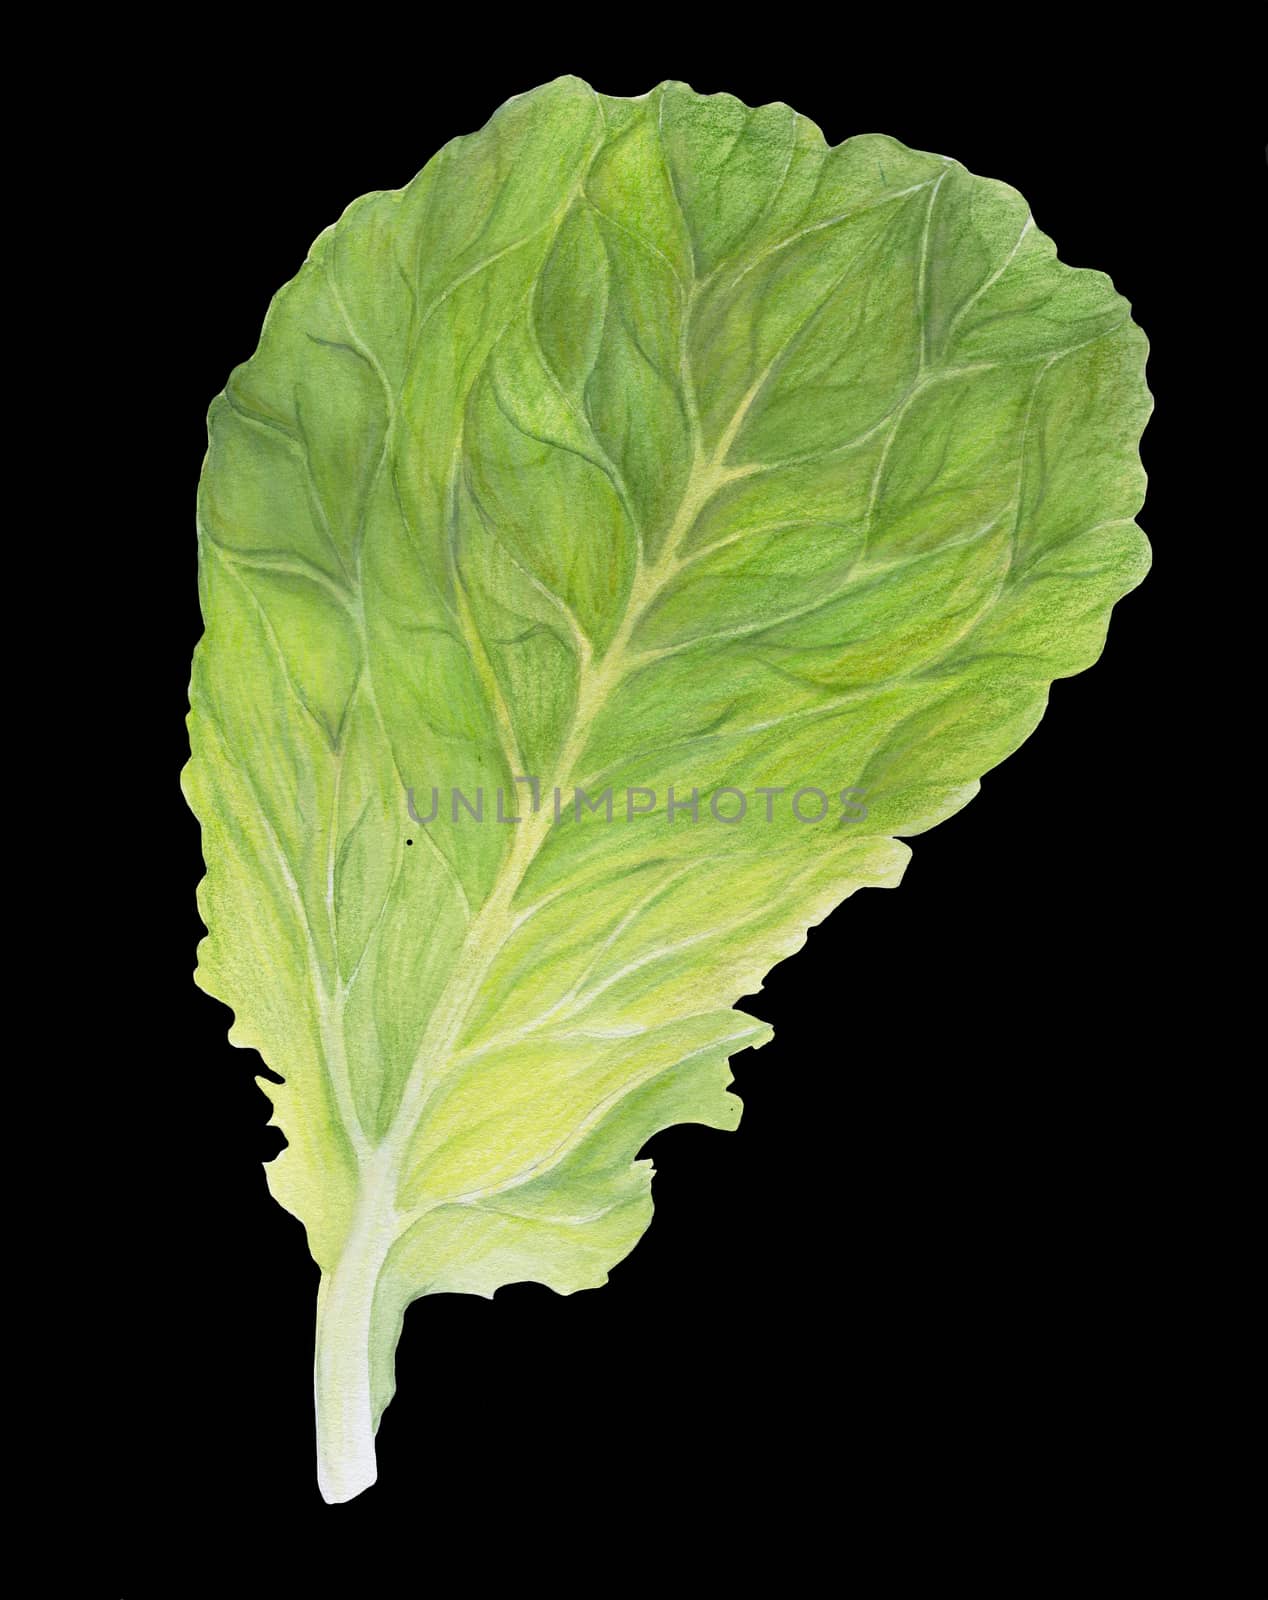 Fresh Lettuce. One Salad Leaf isolated on black background. Green dill. Watercolor illustration. Realistic botanical art. Hand Drawn. Vegetarian Ingredient. For logo, packaging, print, organic food.